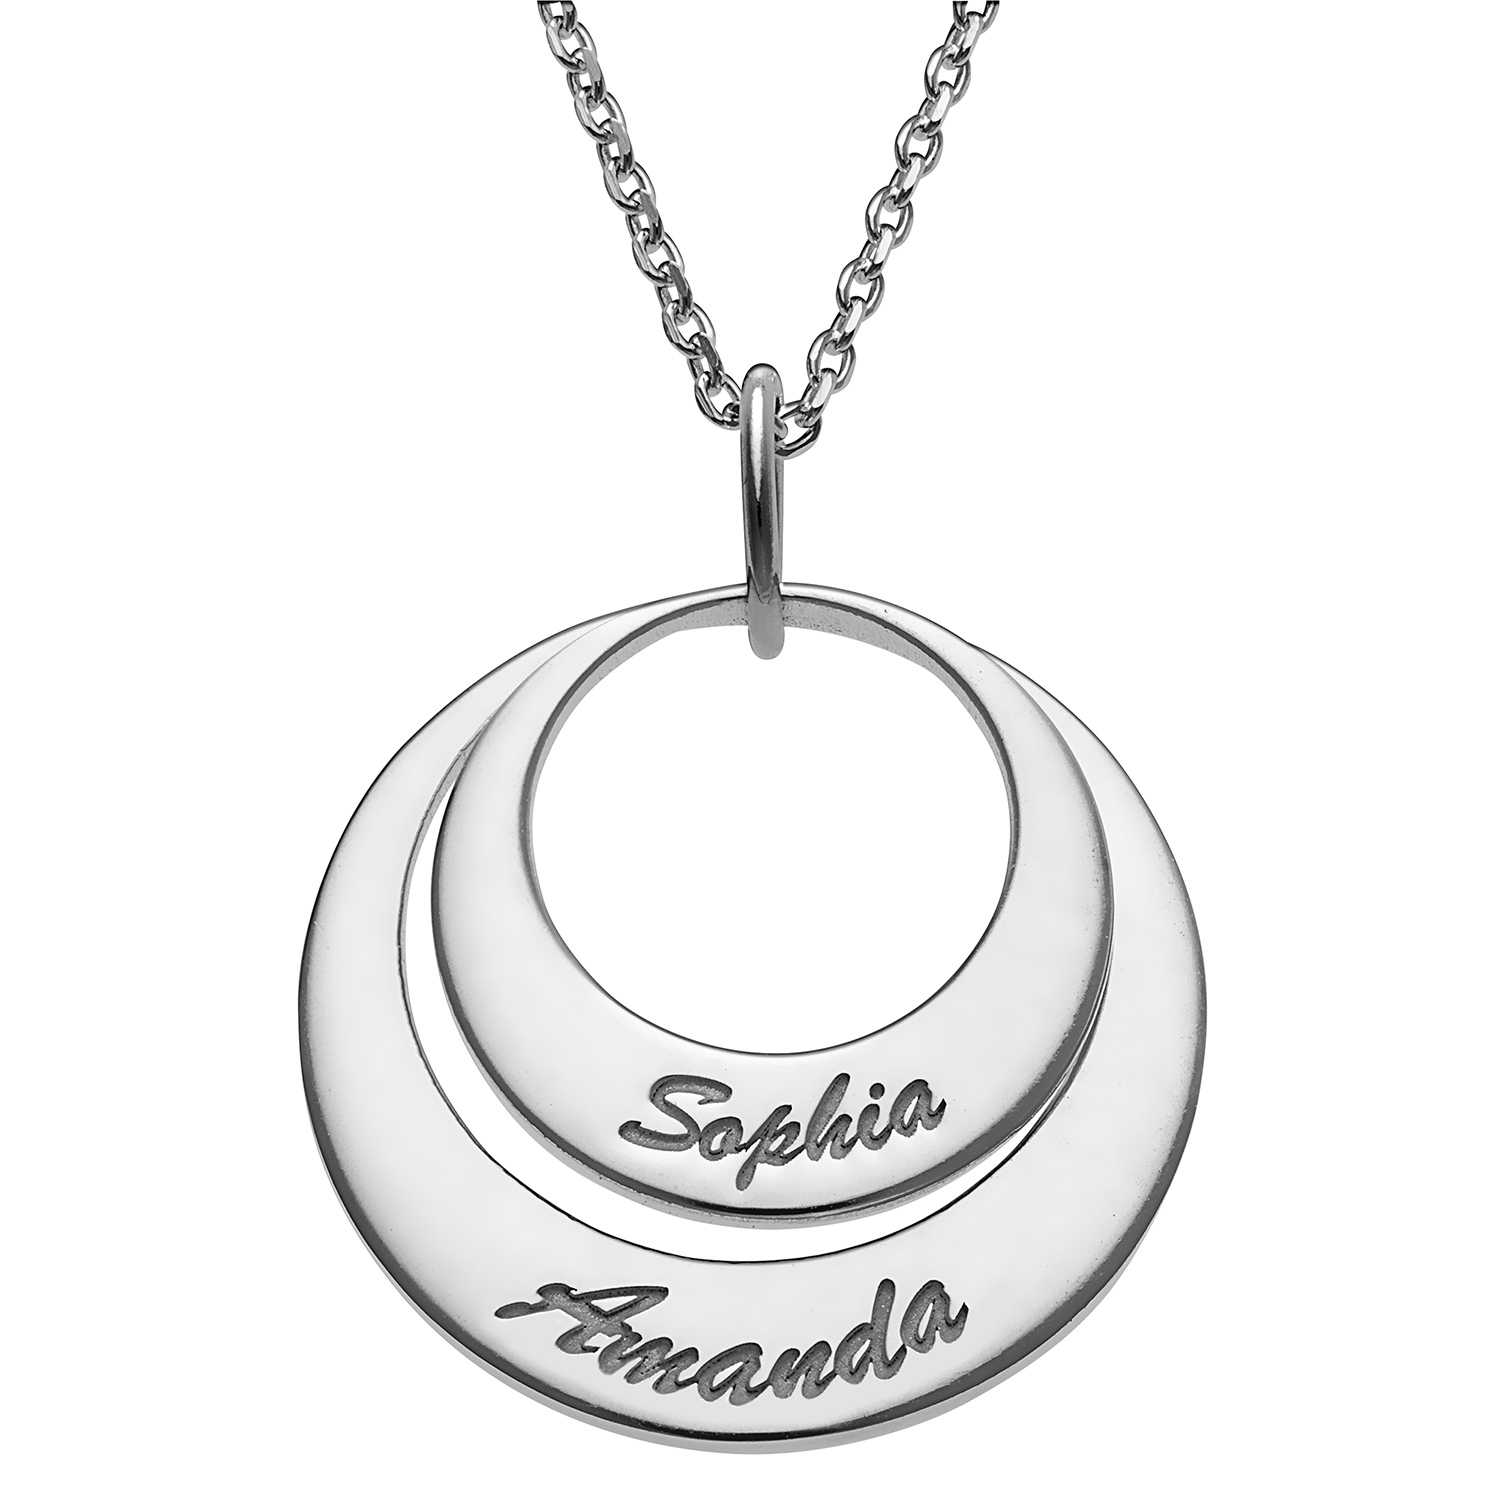 Nesting Circles with Names Necklace - 2 Discs